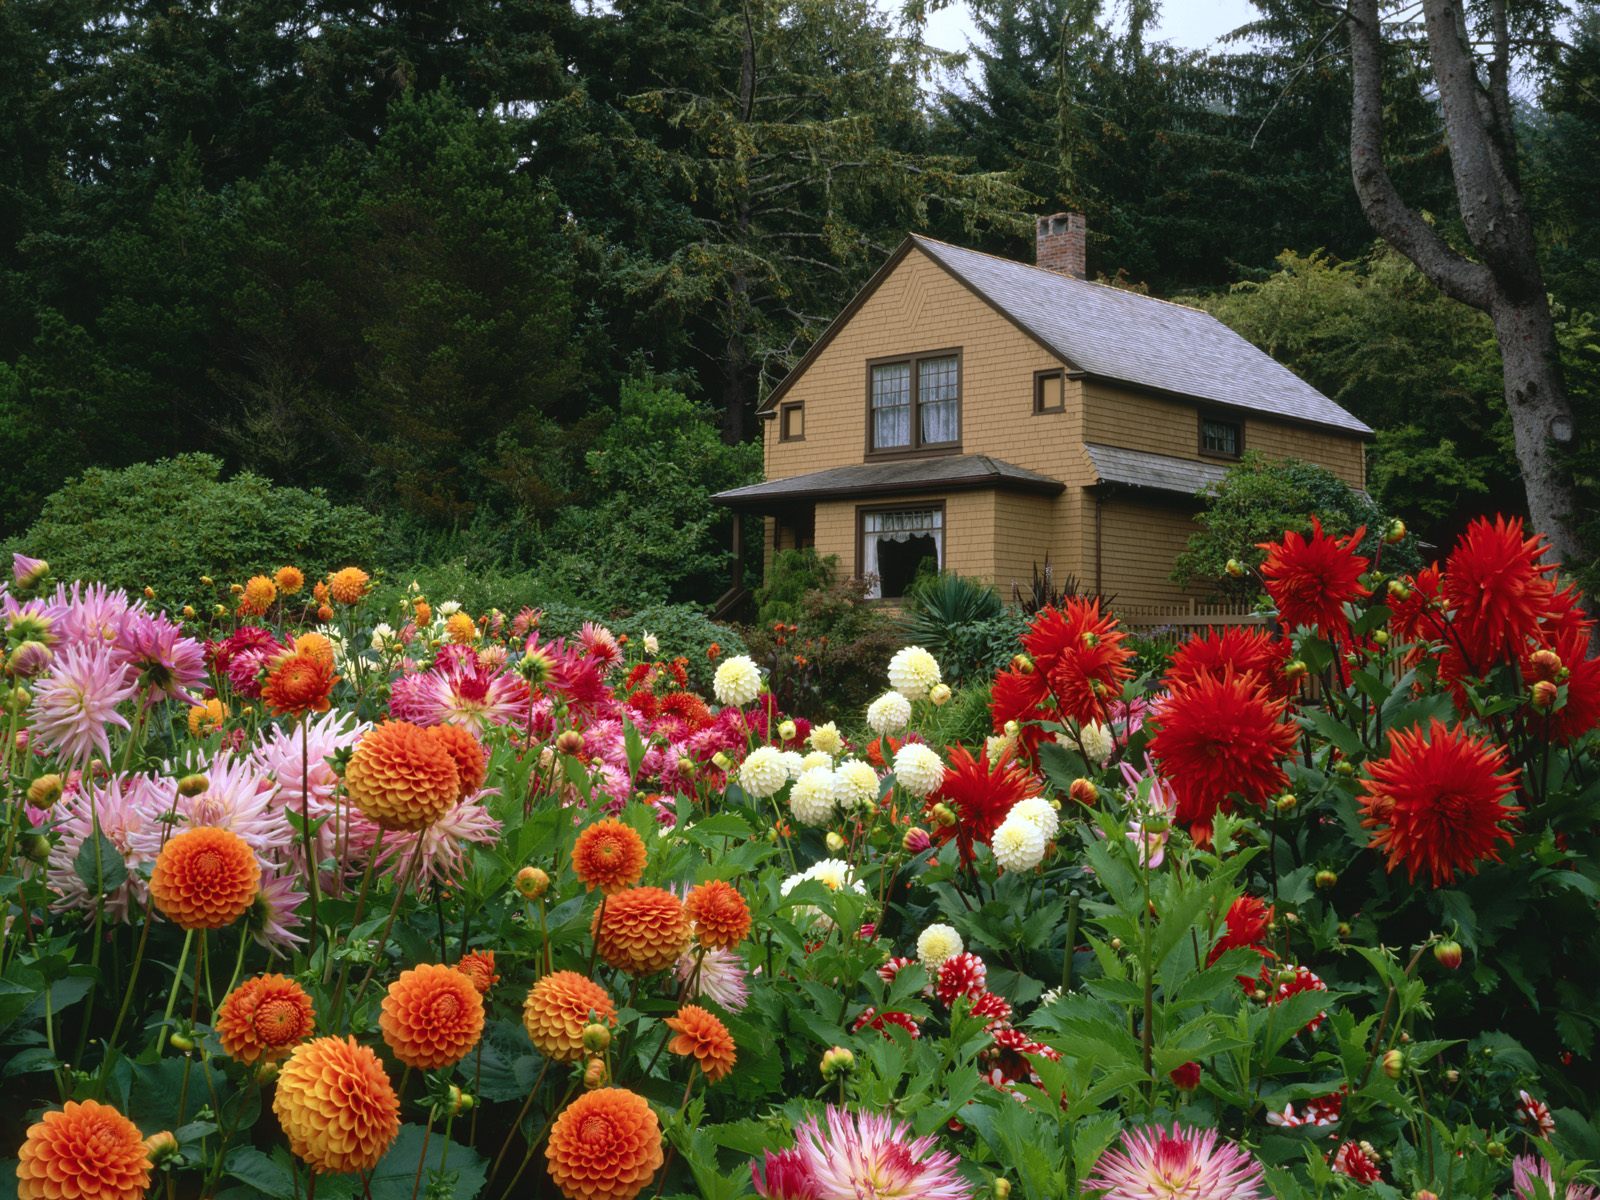 House surrounded by beautiful garden with dahlias